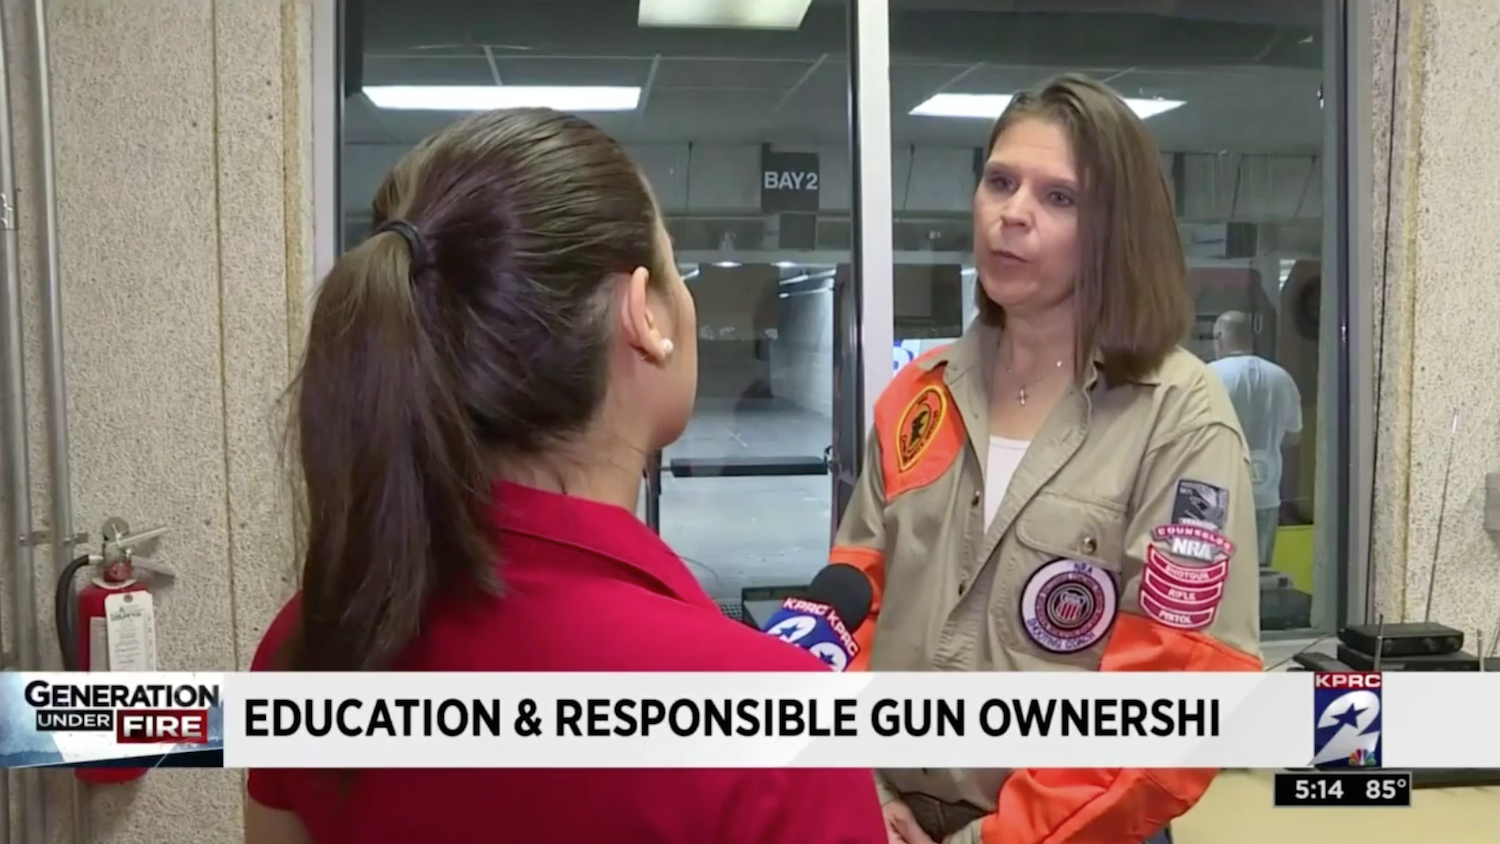 KPRC: Local NRA Community Says Education, Responsible Gun Ownership Key to Safety